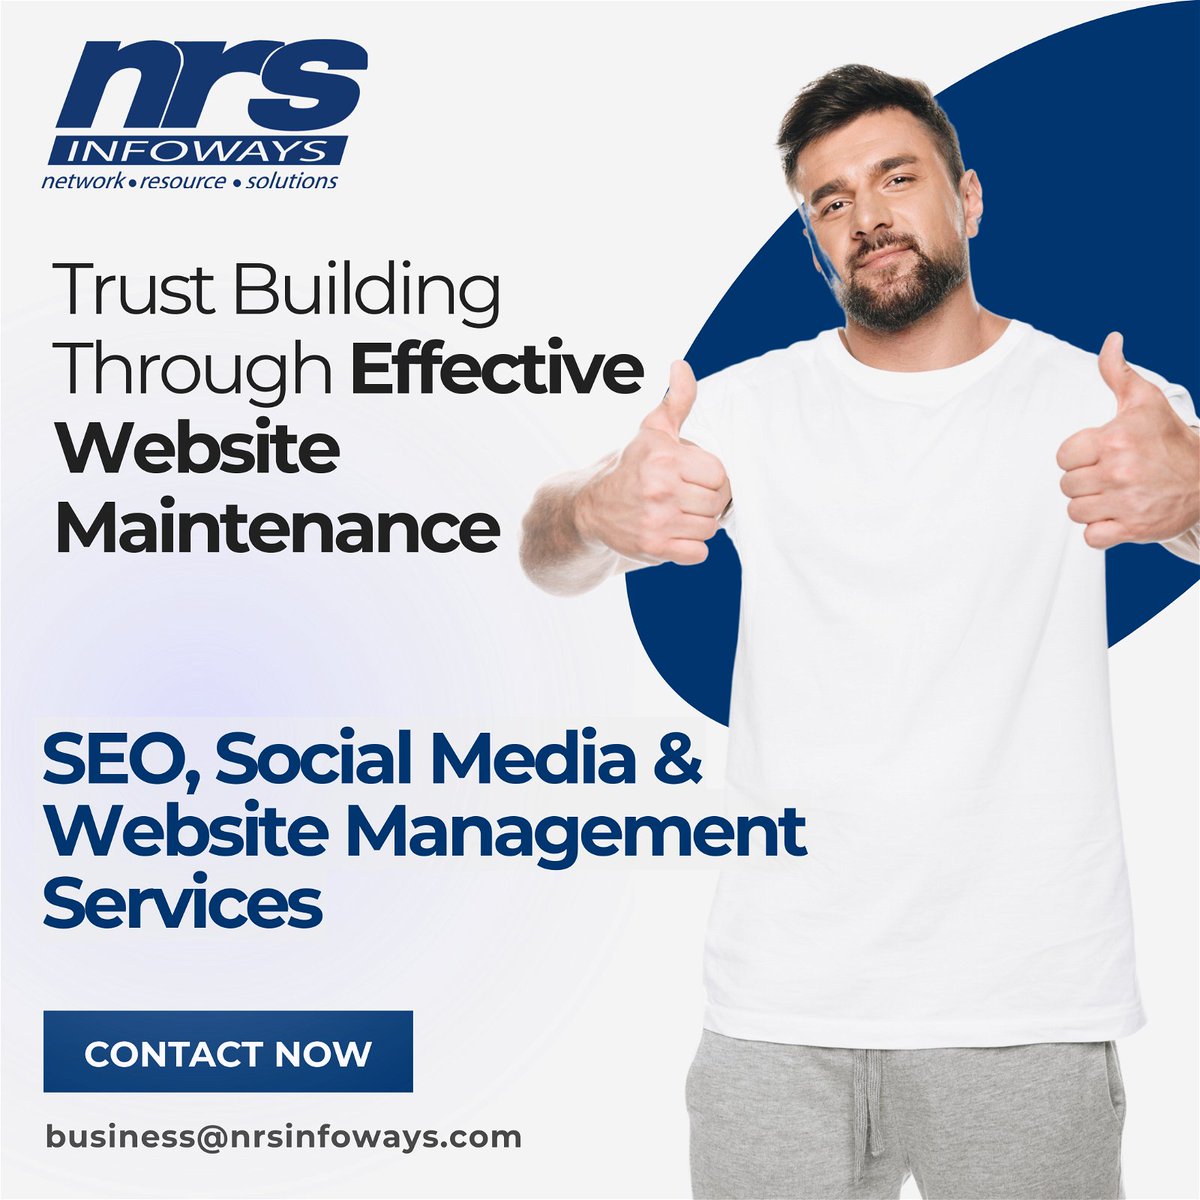 Trust Building Through Effective Website Maintenance

A regularly updated wesite signals professionalism, dedication and builds trust & confidence in your brand.

We can help
Lets discuss business@nrsinfoways.com
#websitemaintenance #trustbuilding #branding #seo #nrsinfoways